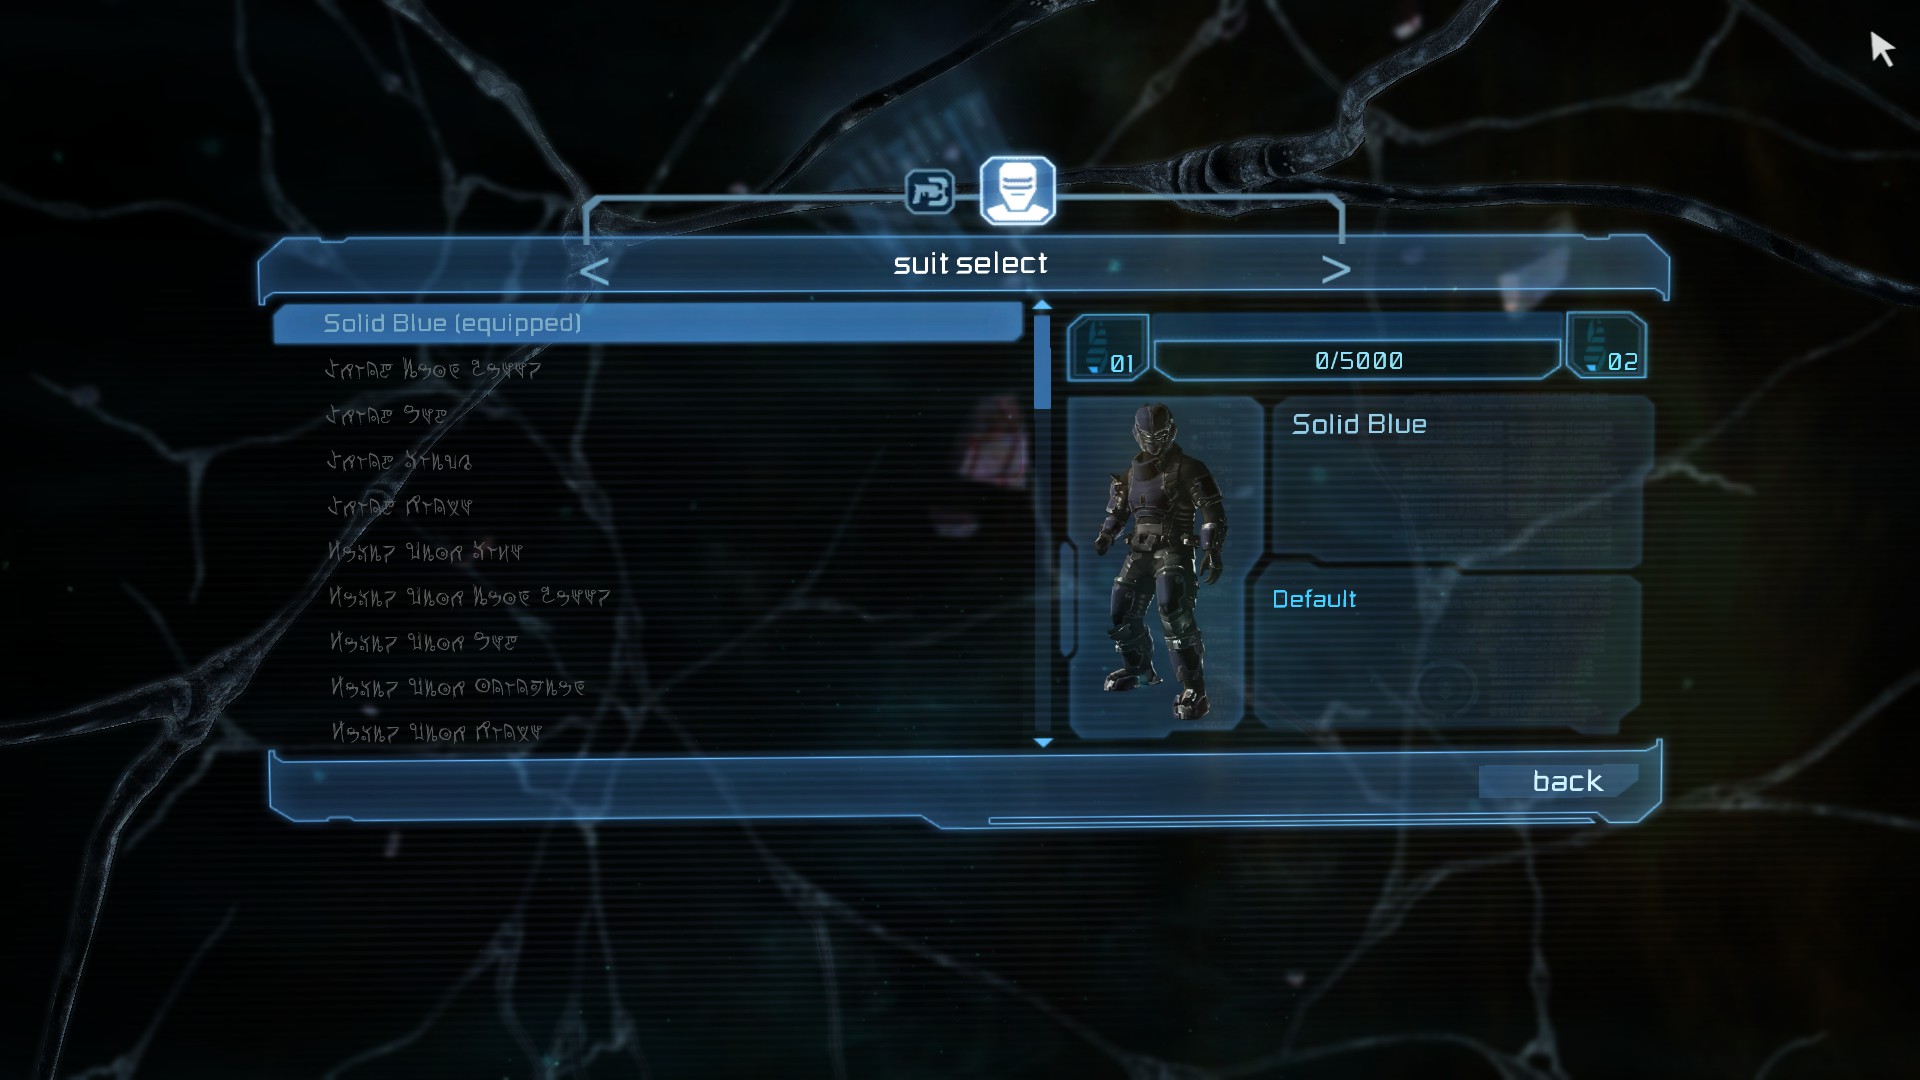 dead space 2 skins mod for multiplayer